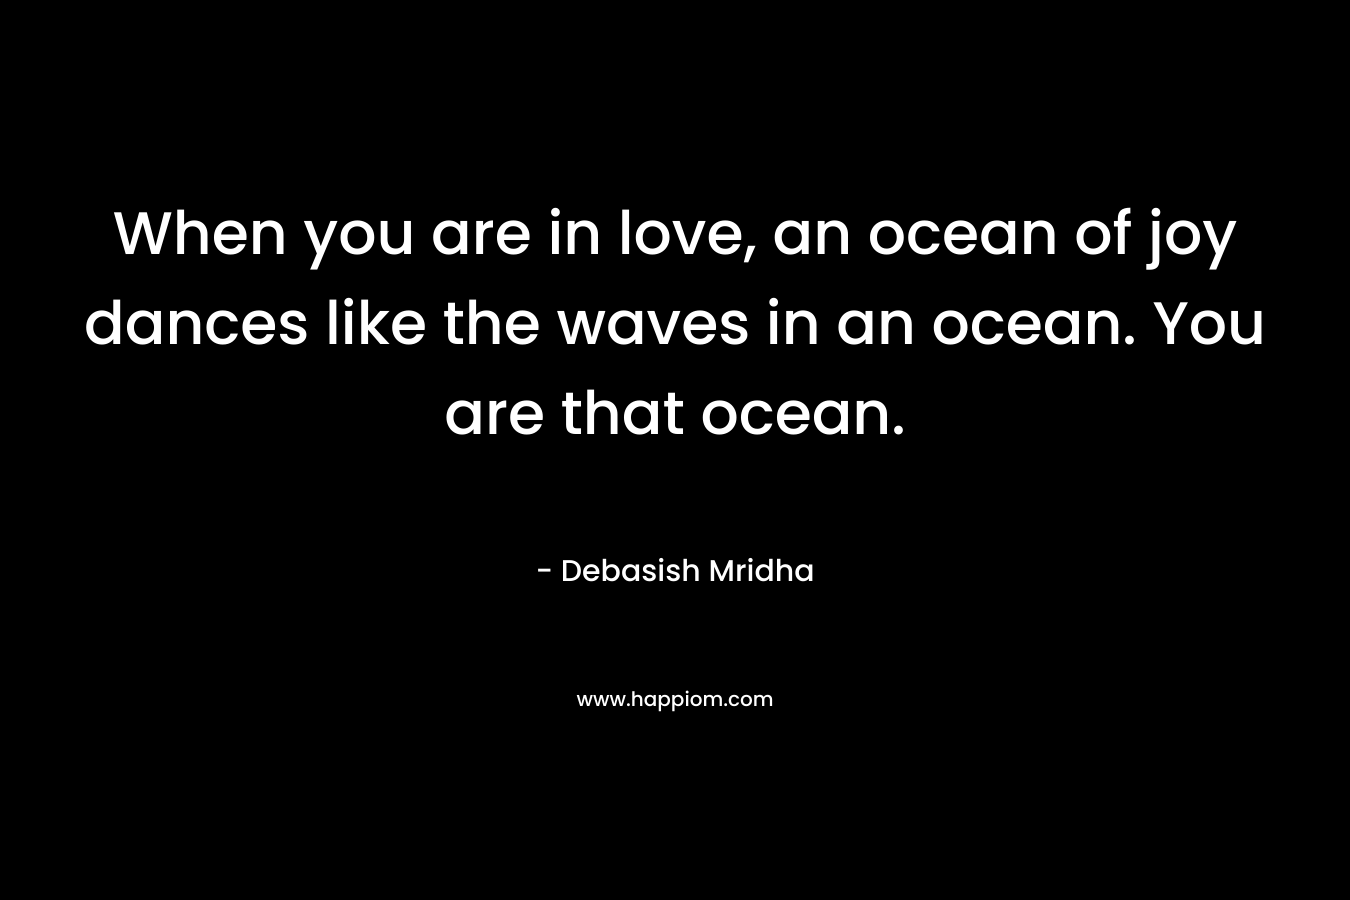 When you are in love, an ocean of joy dances like the waves in an ocean. You are that ocean.